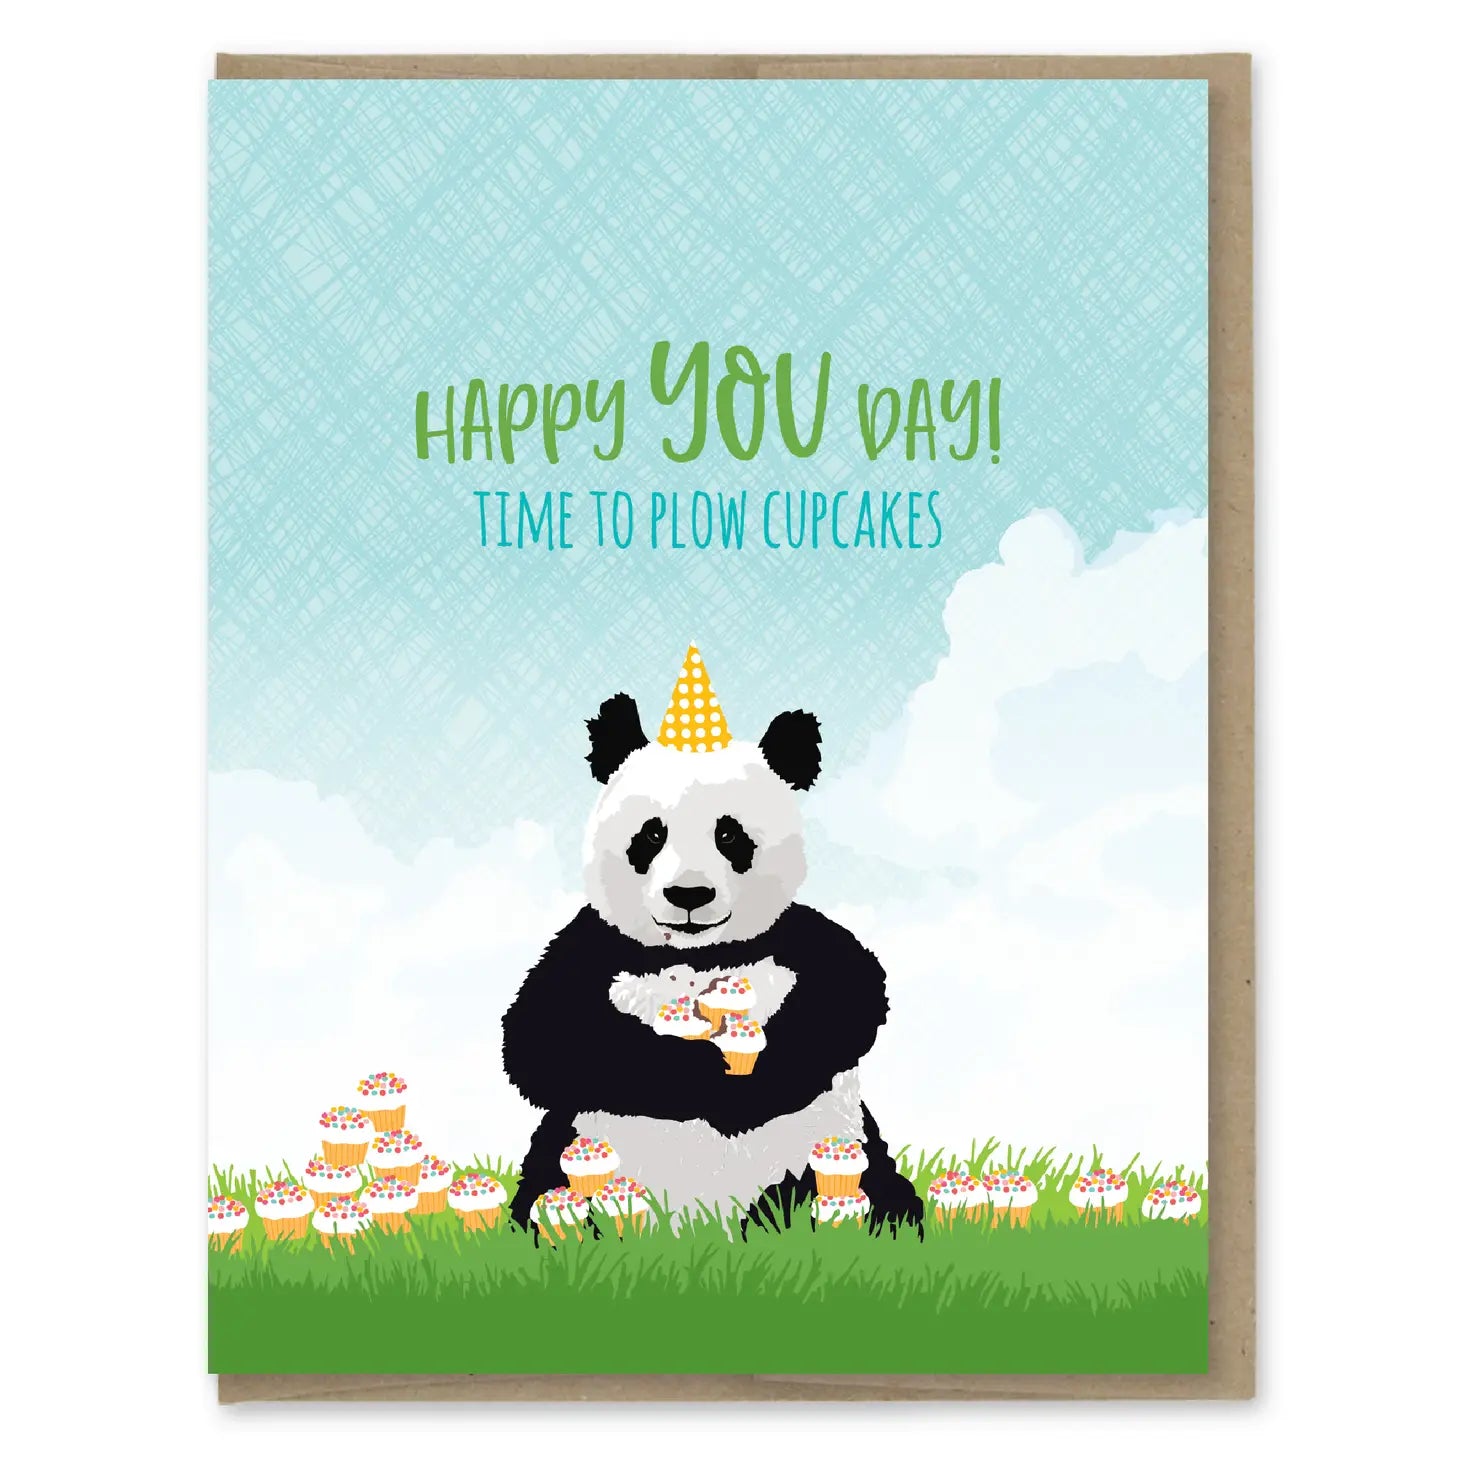 Modern Printed Matter “Happy You Day” Card